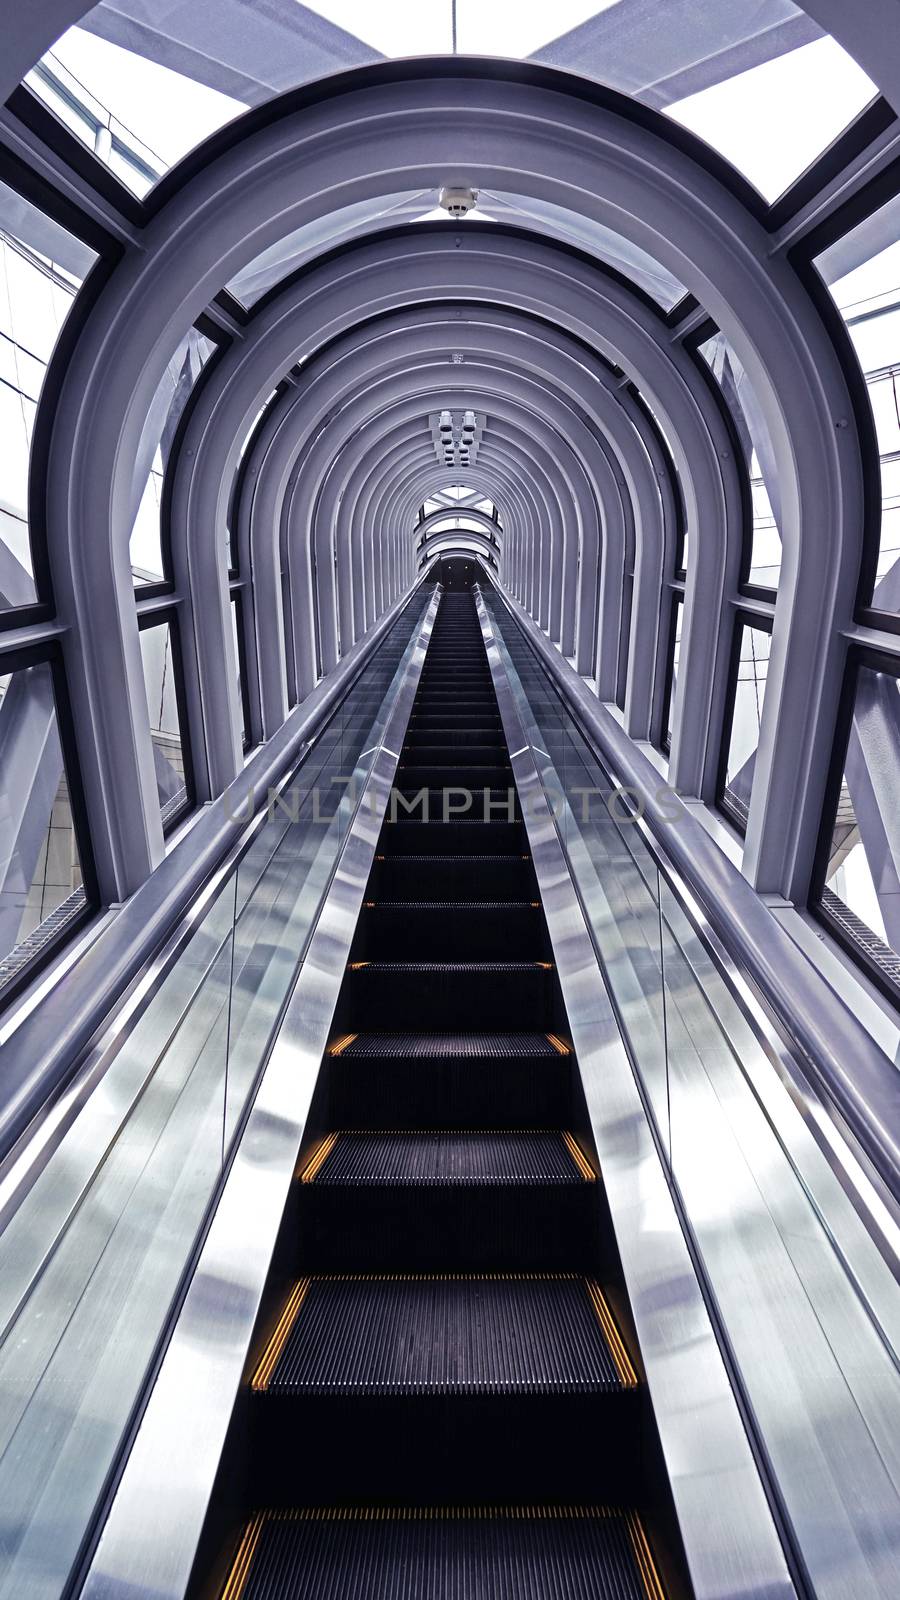 The indoor escalator, window, interior in architectural building from perspertive view